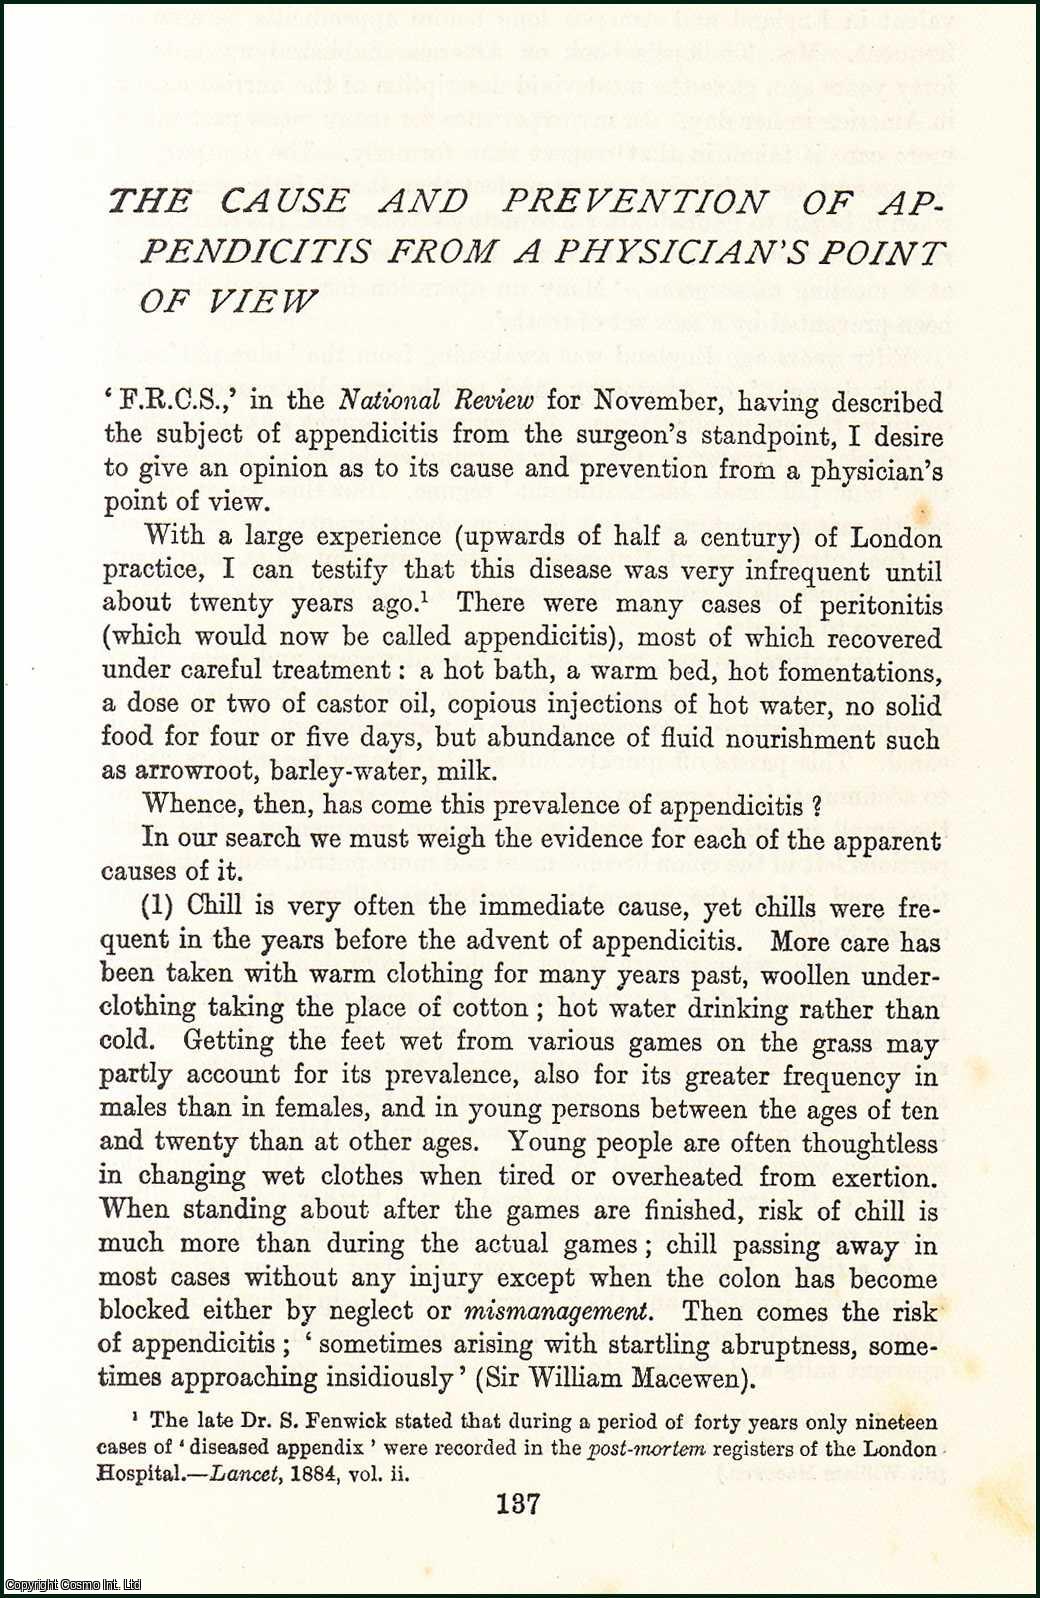 Joseph Kidd, M.D. - The Cause & Prevention of Appendicitis from a Physician's Point of View. An original article from the Nineteenth Century Magazine, 1905.